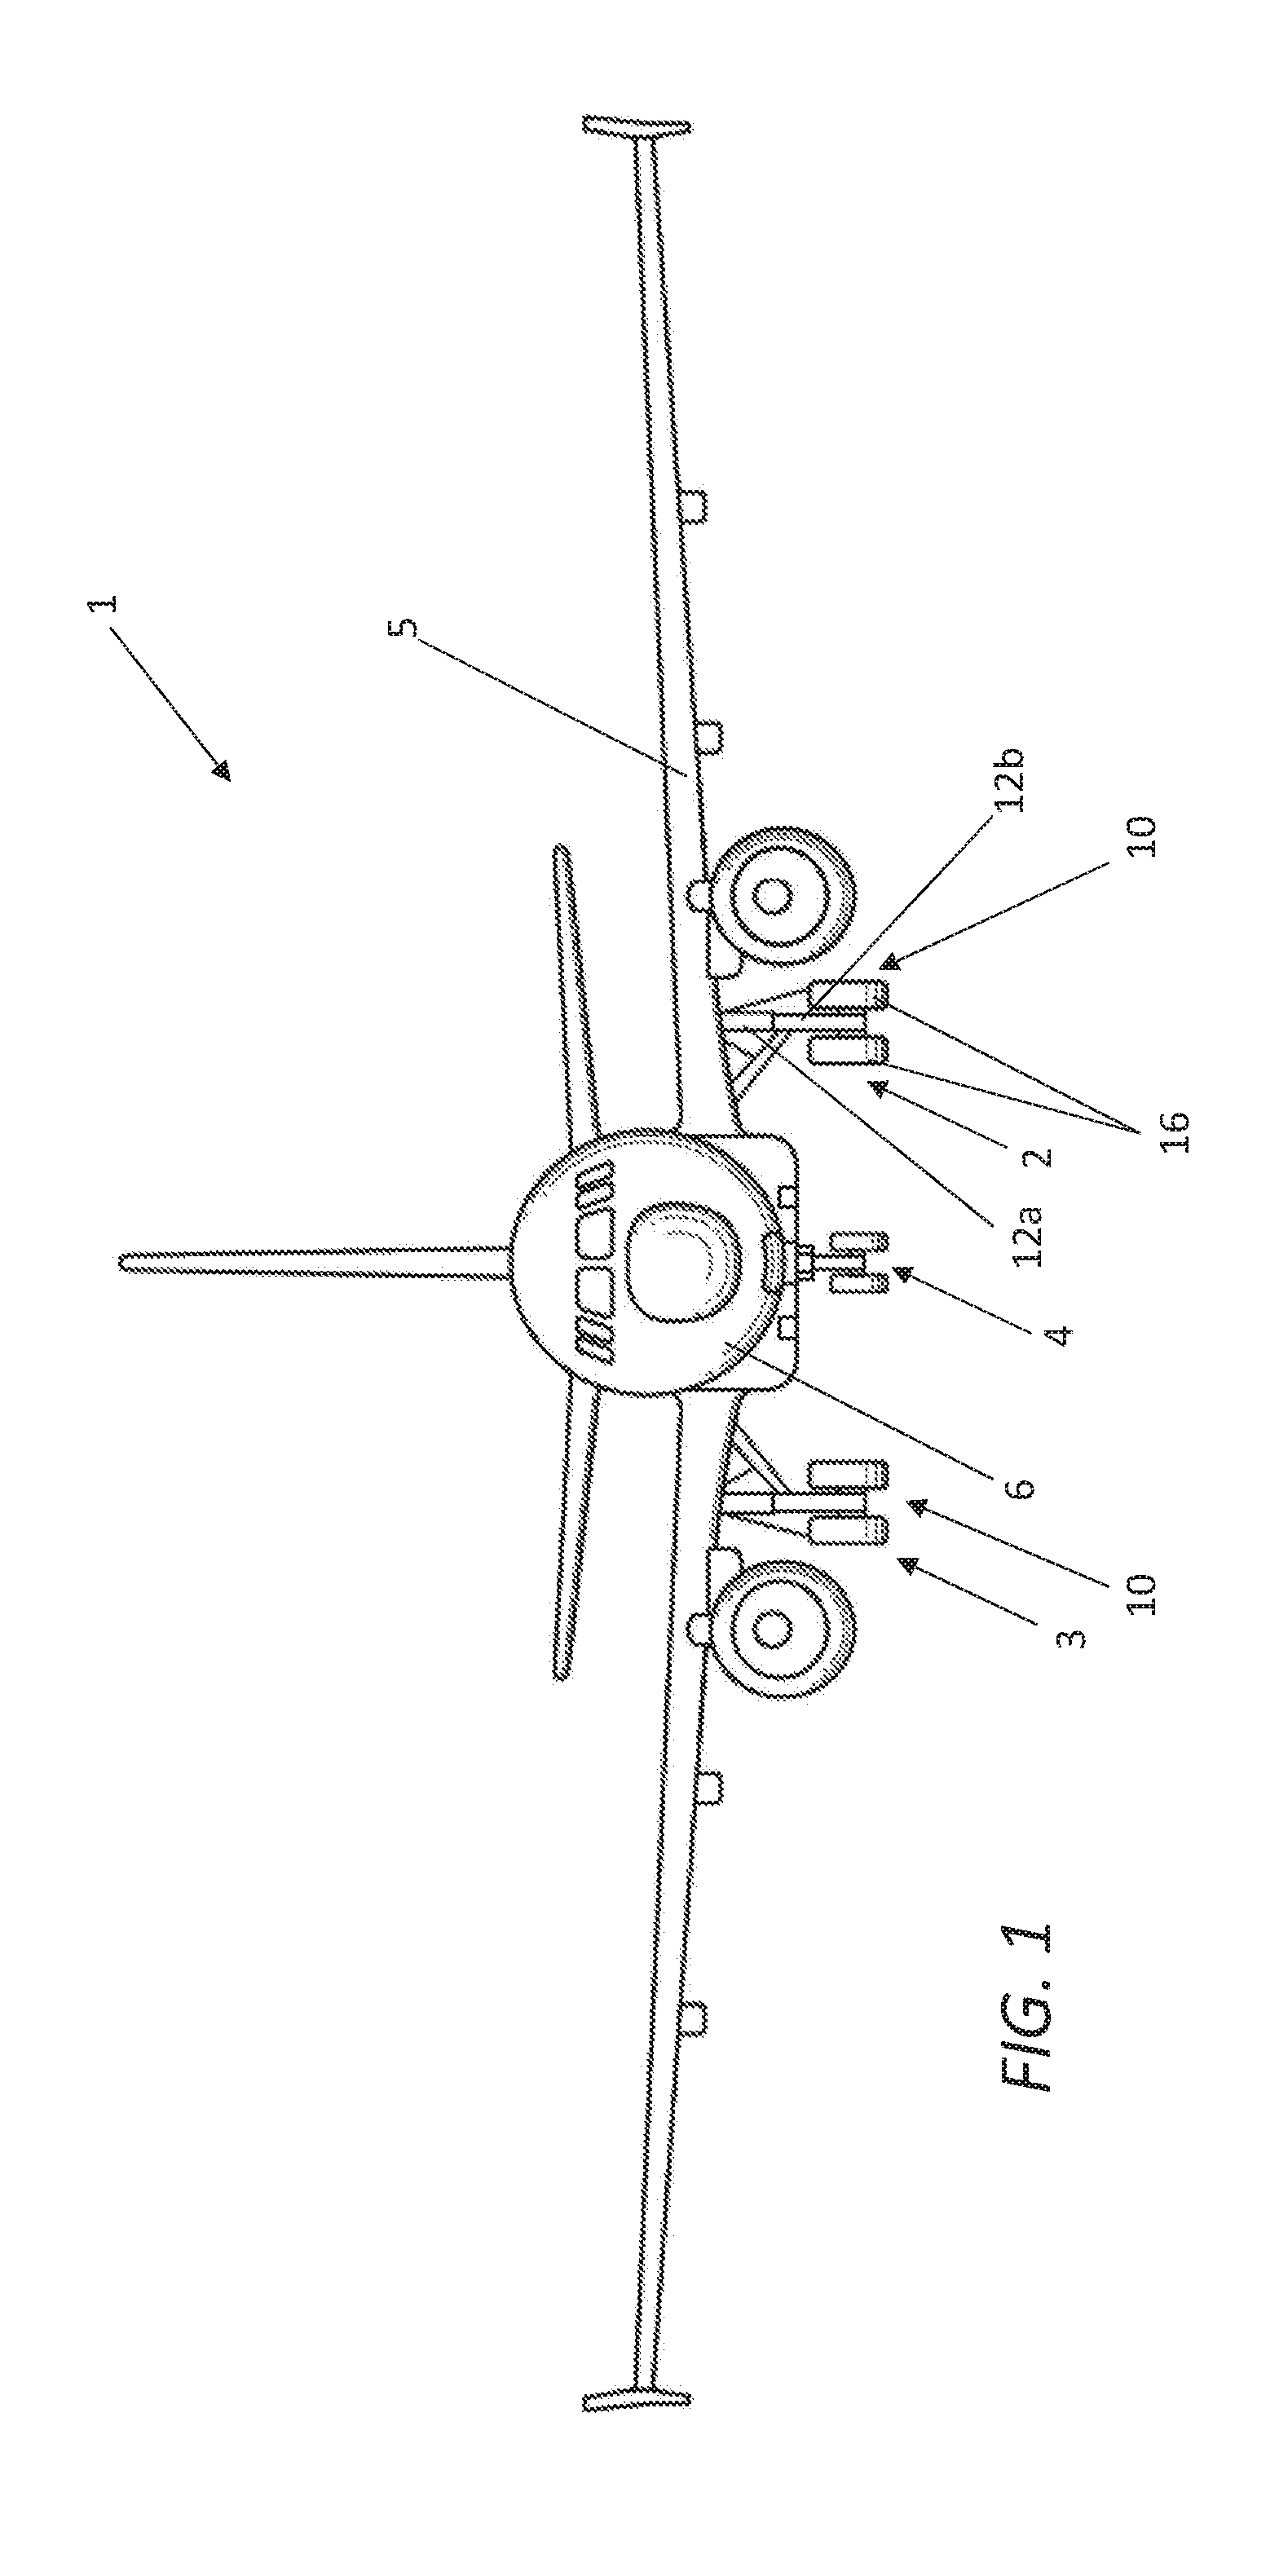 Aircraft steering system